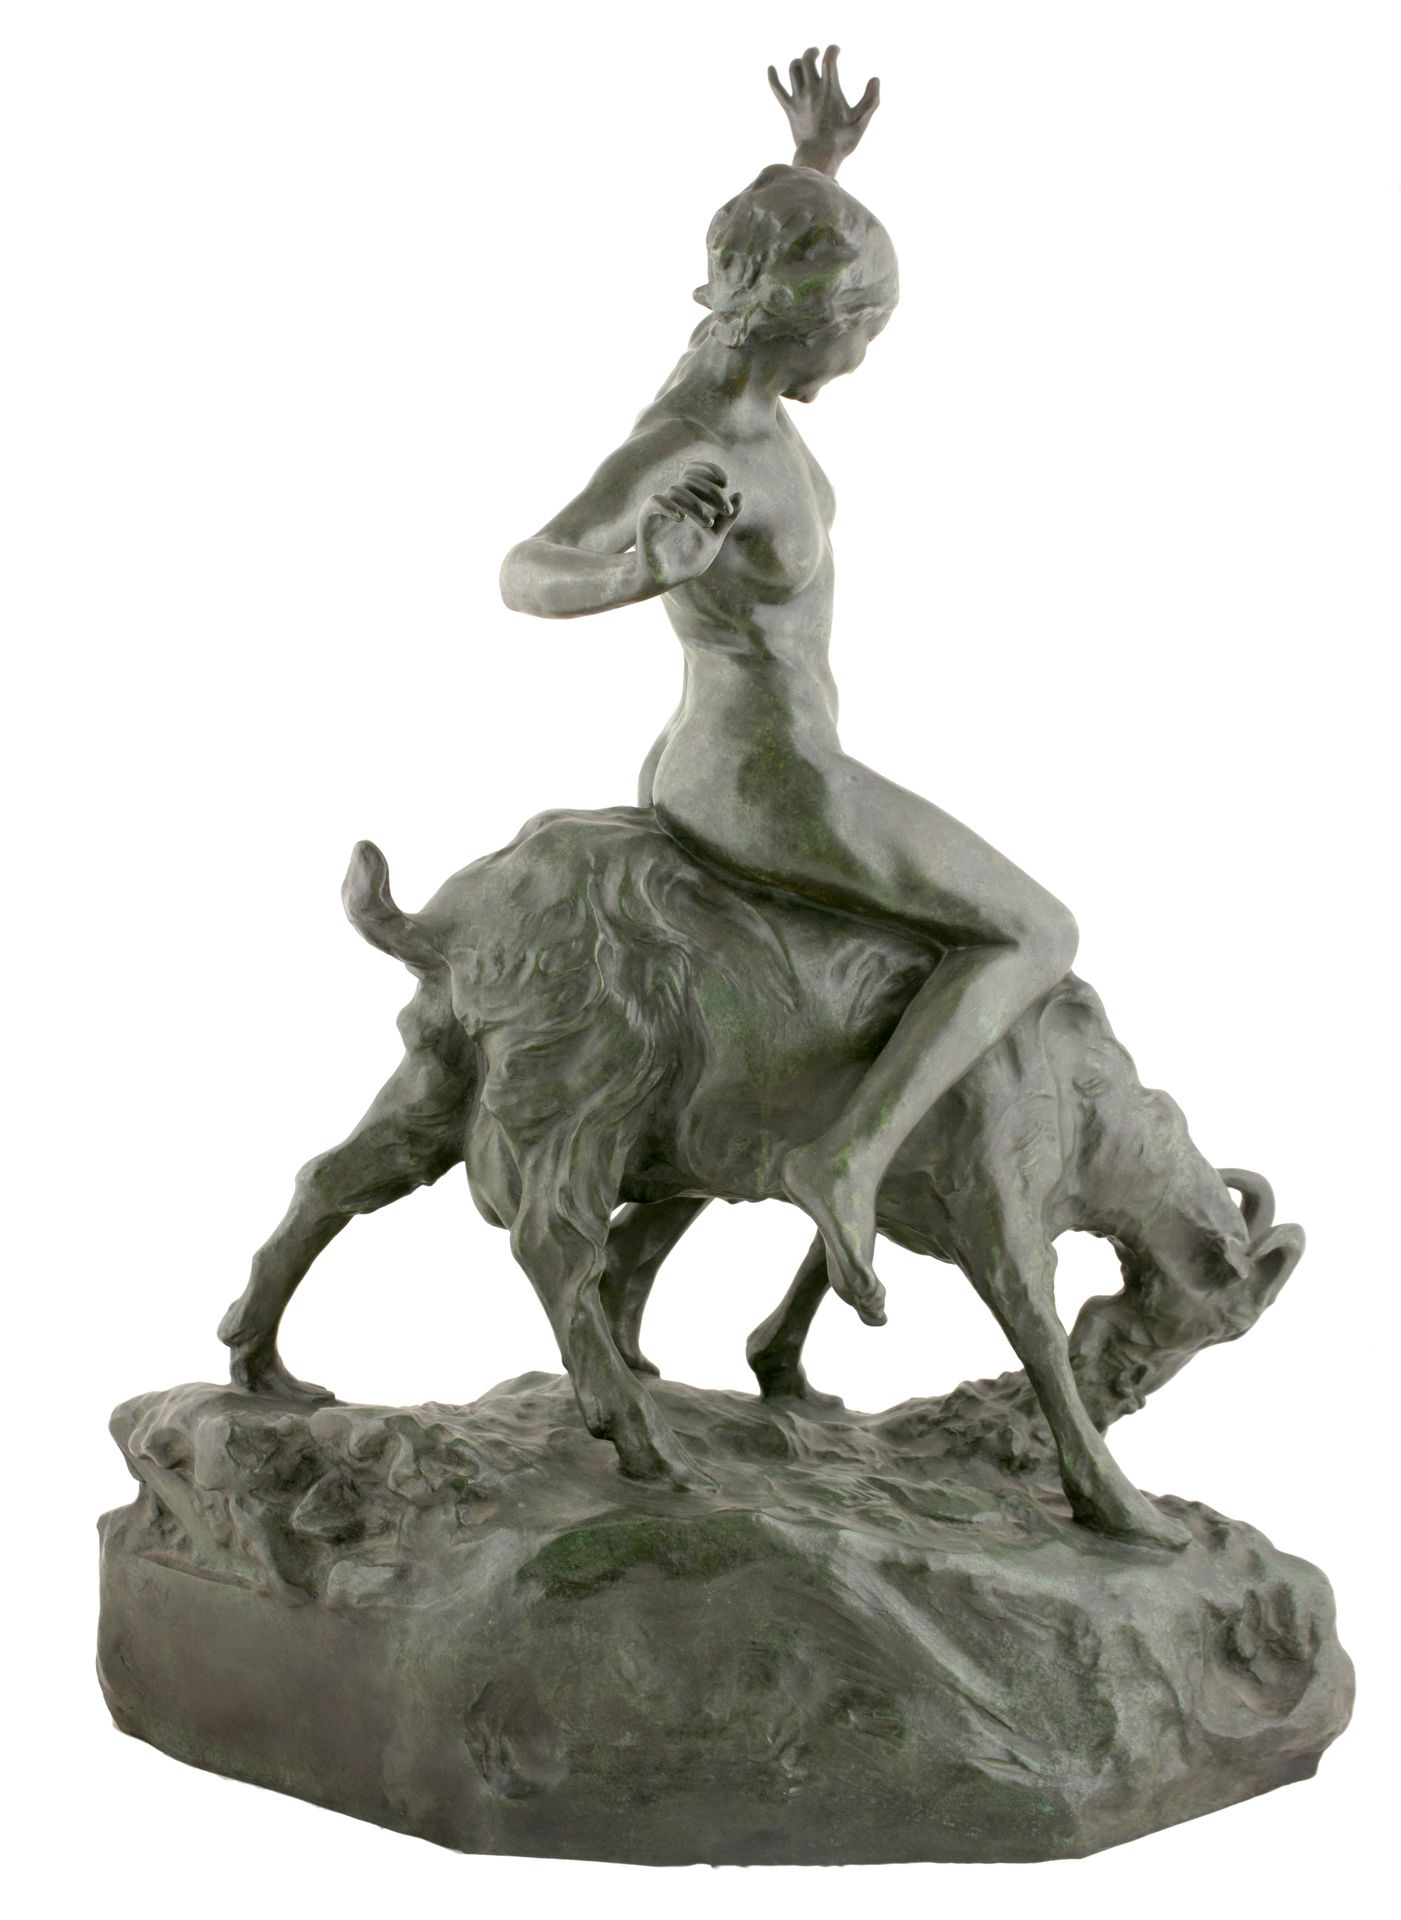 COURTENS, Alfred (1889-1967) Naked girl riding a goat (1914)





Courtens creat&hellip;